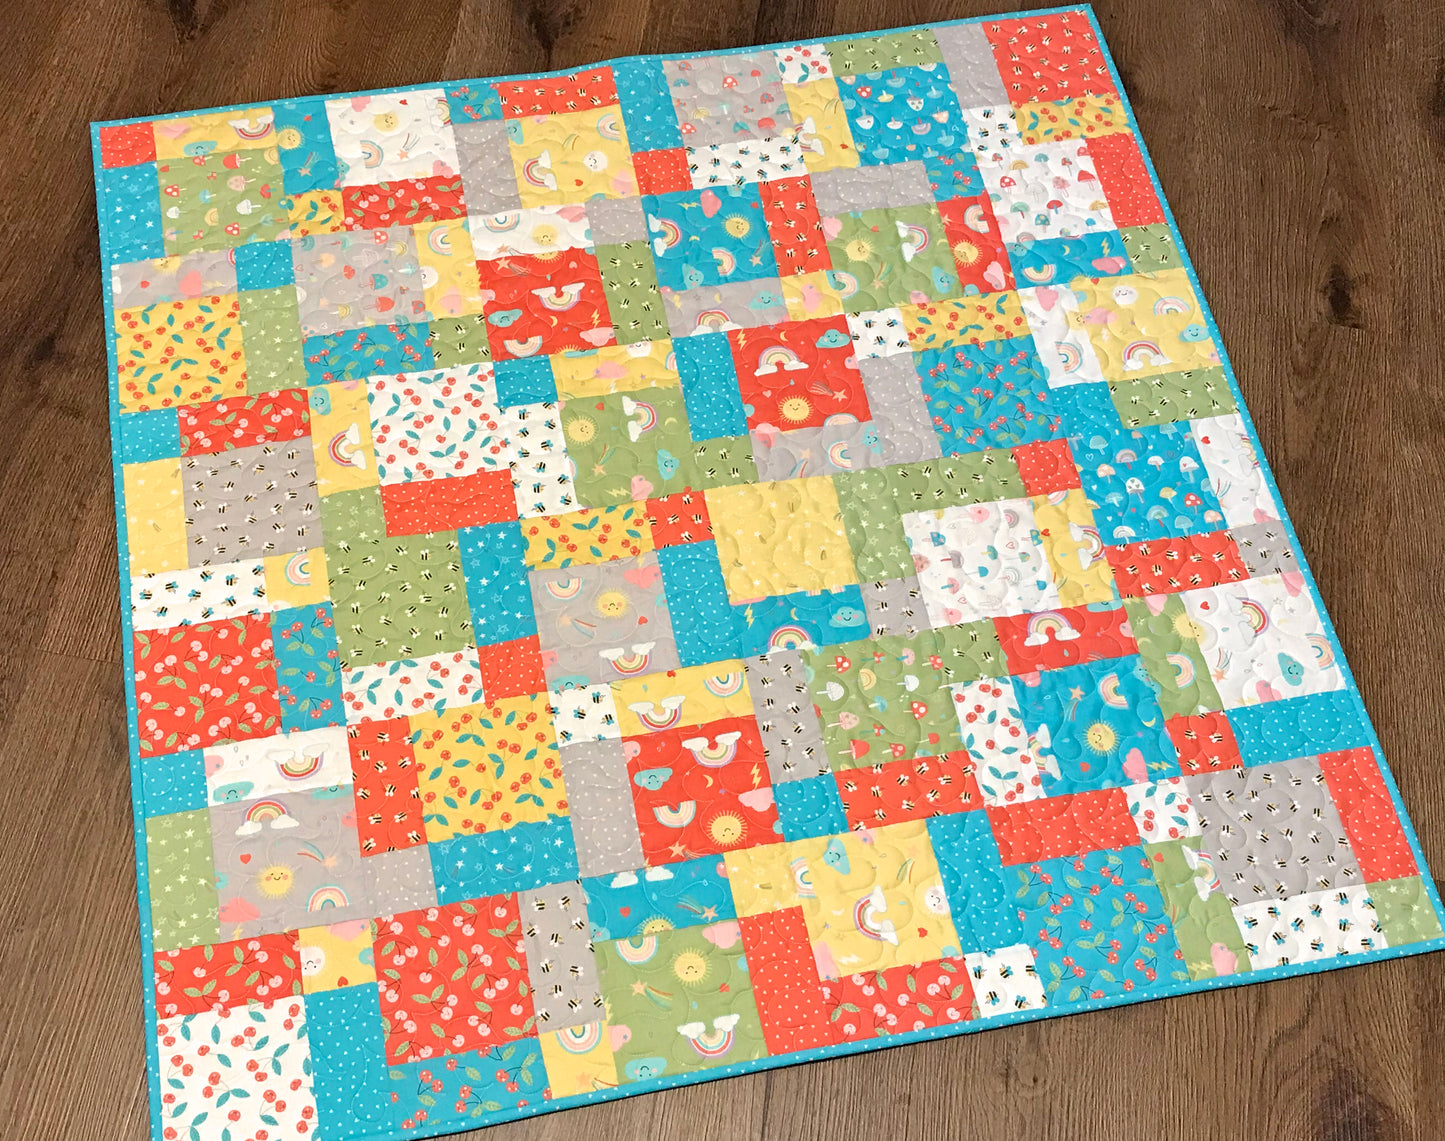 Charming Baby Quilt Pattern for Charm Squares - Digital Quilt Pattern - Handmade Quilts, Digital Patterns, and Home Décor items online - Cuddle Cat Quiltworks